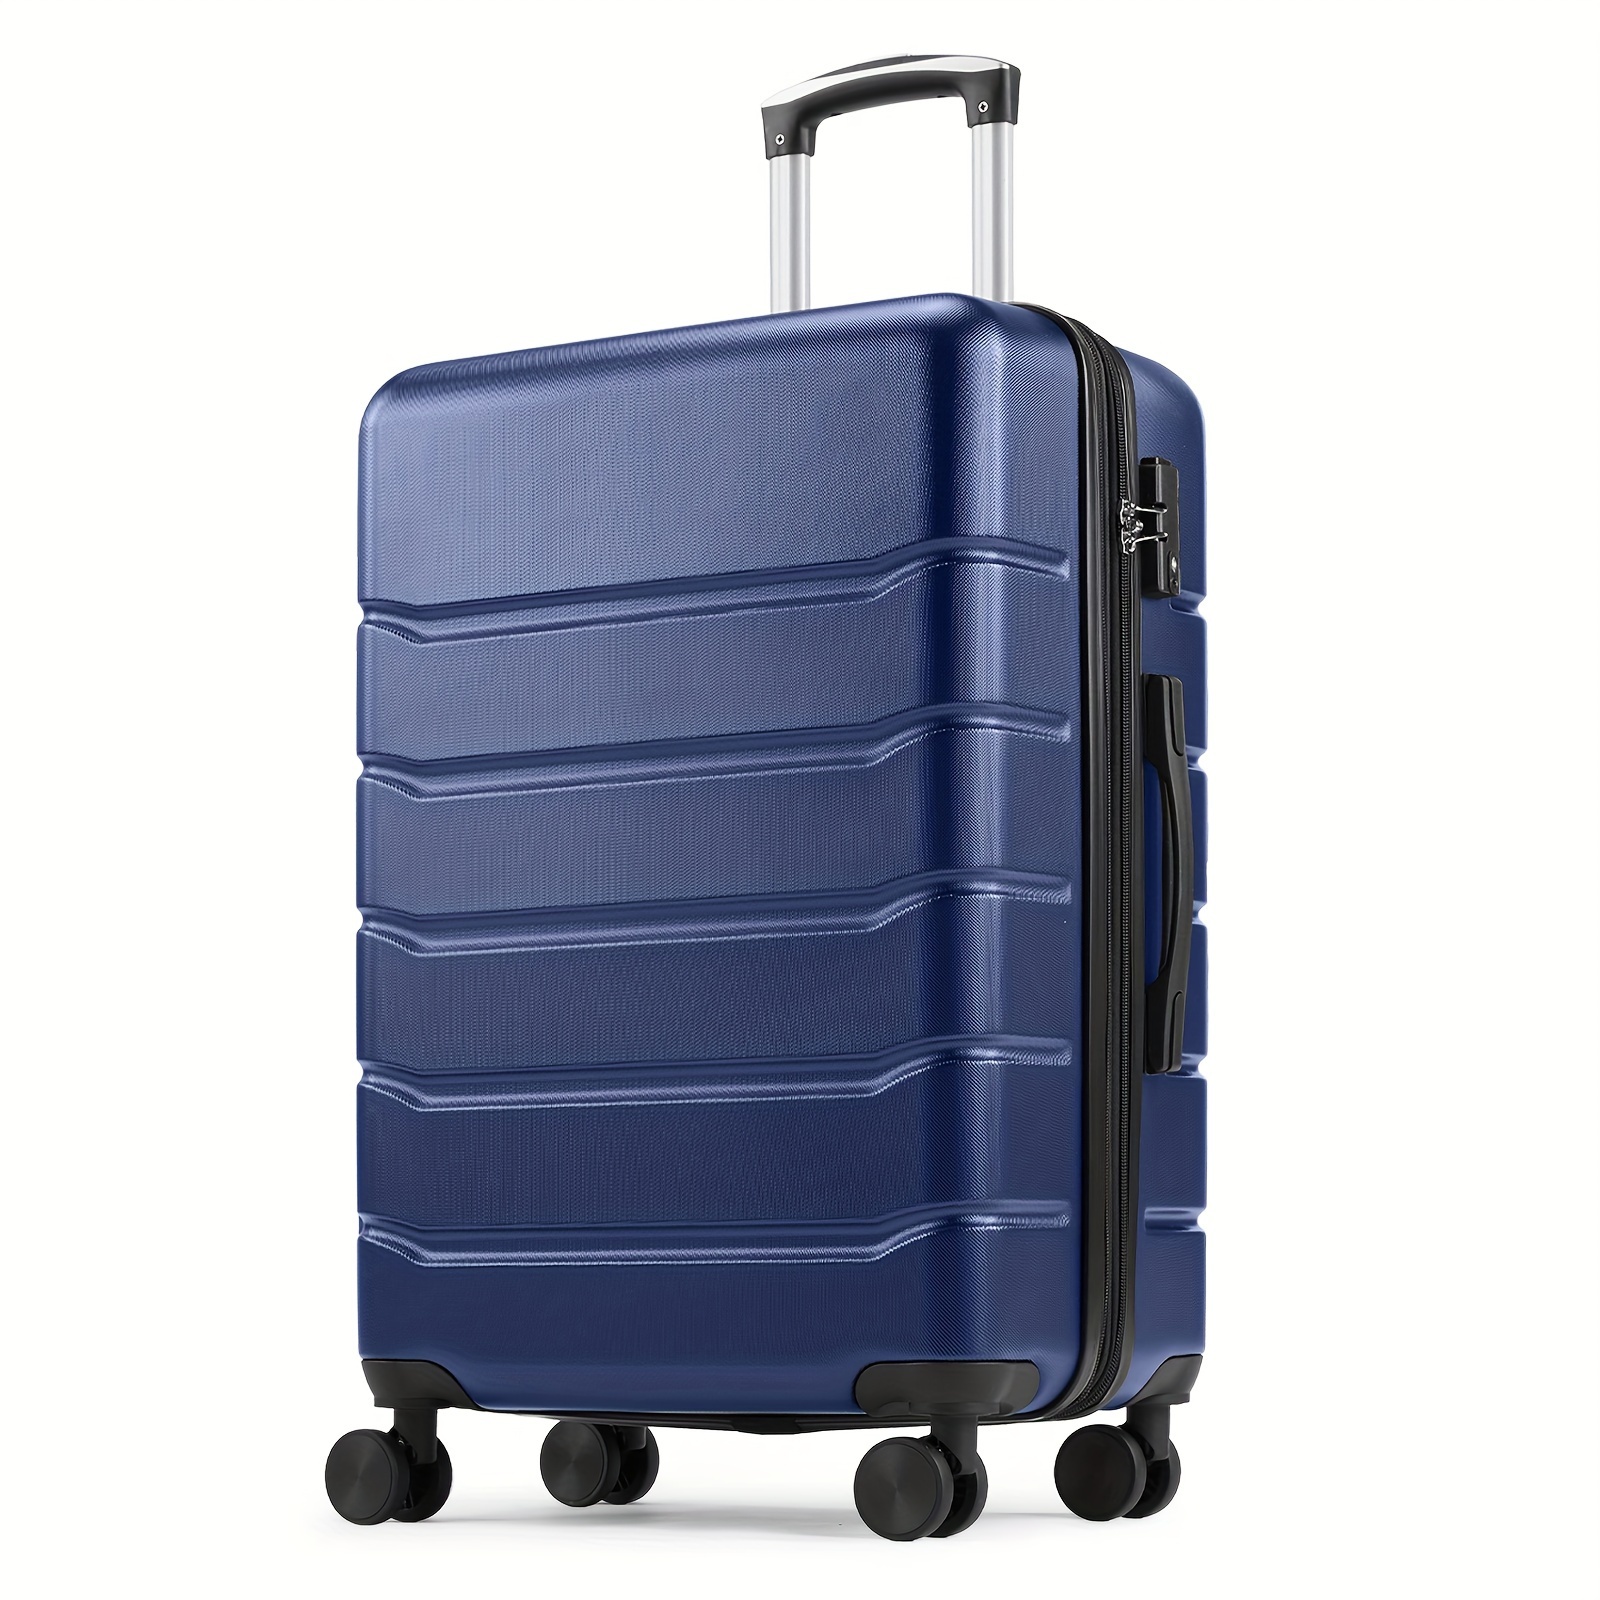 

28-inch Hardside Luggage With 4 Double Spinner Wheels, Hard Shell Lightweight Roller Suitcase